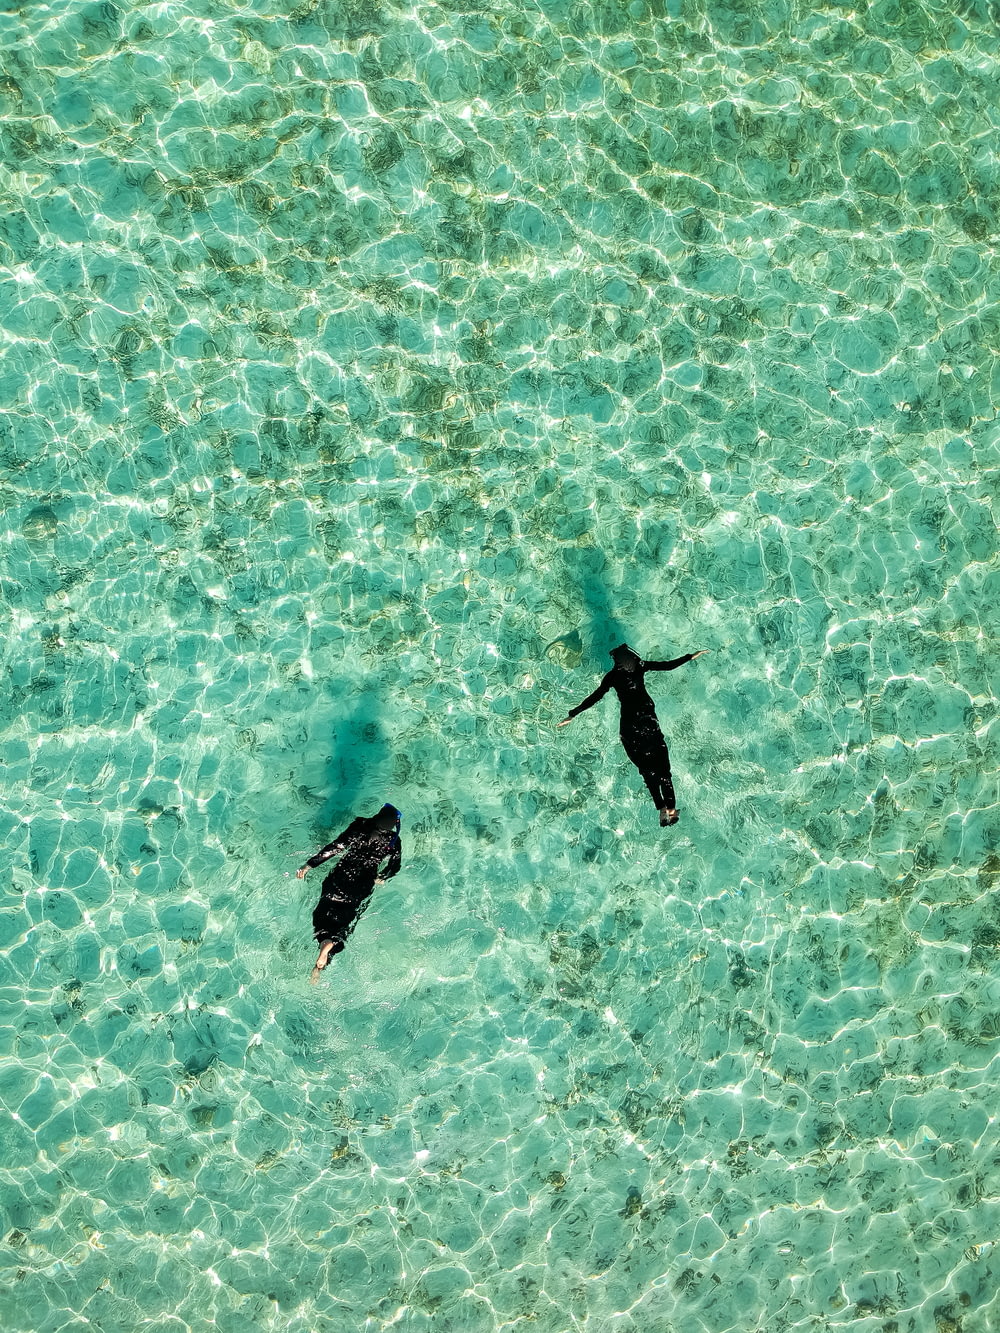 aerial photo of two human swimming on body of water